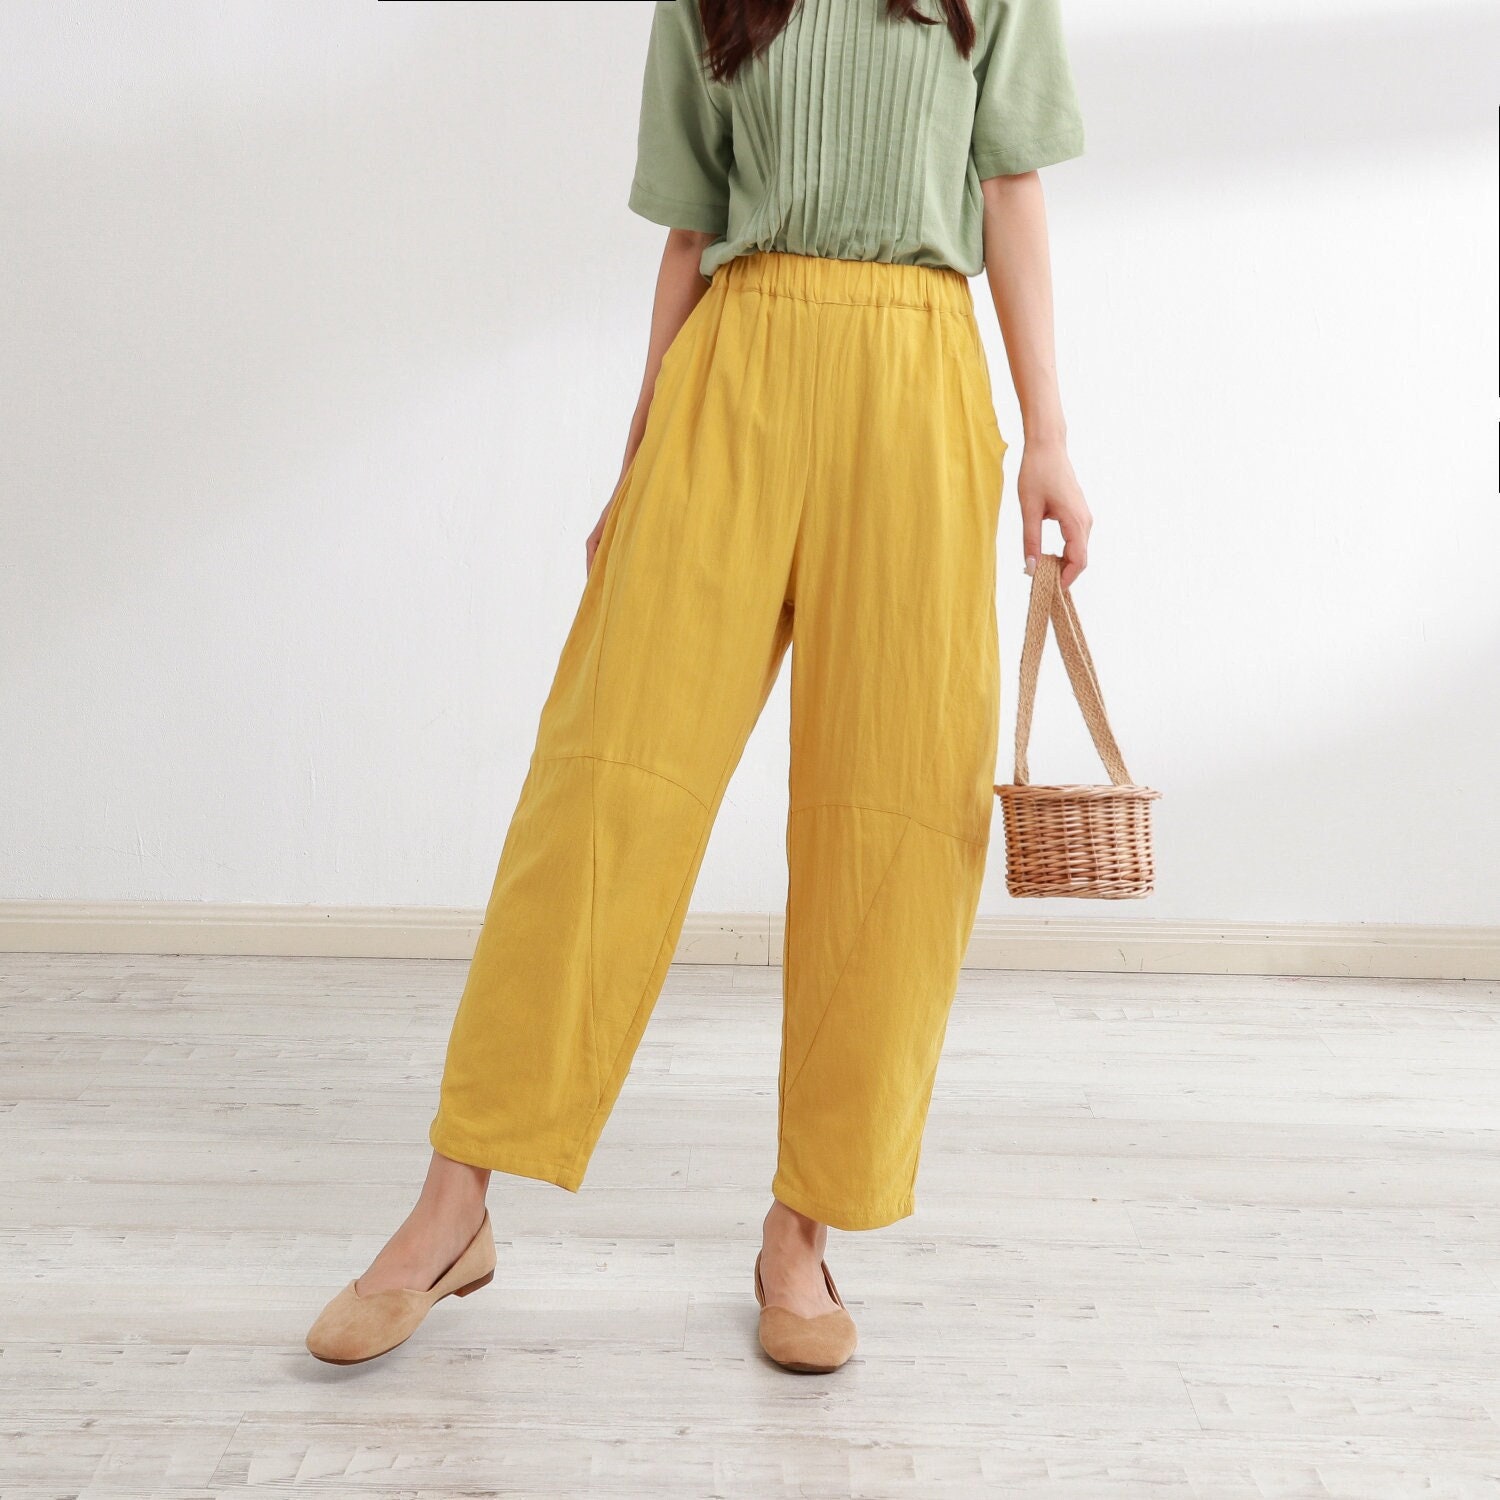 NECHOLOGY Womens Pants Crop Pants for Women Casual Summer Womens Culottes  Cotton Linen Wide Business Casual Pants for Women Petite Yellow Large